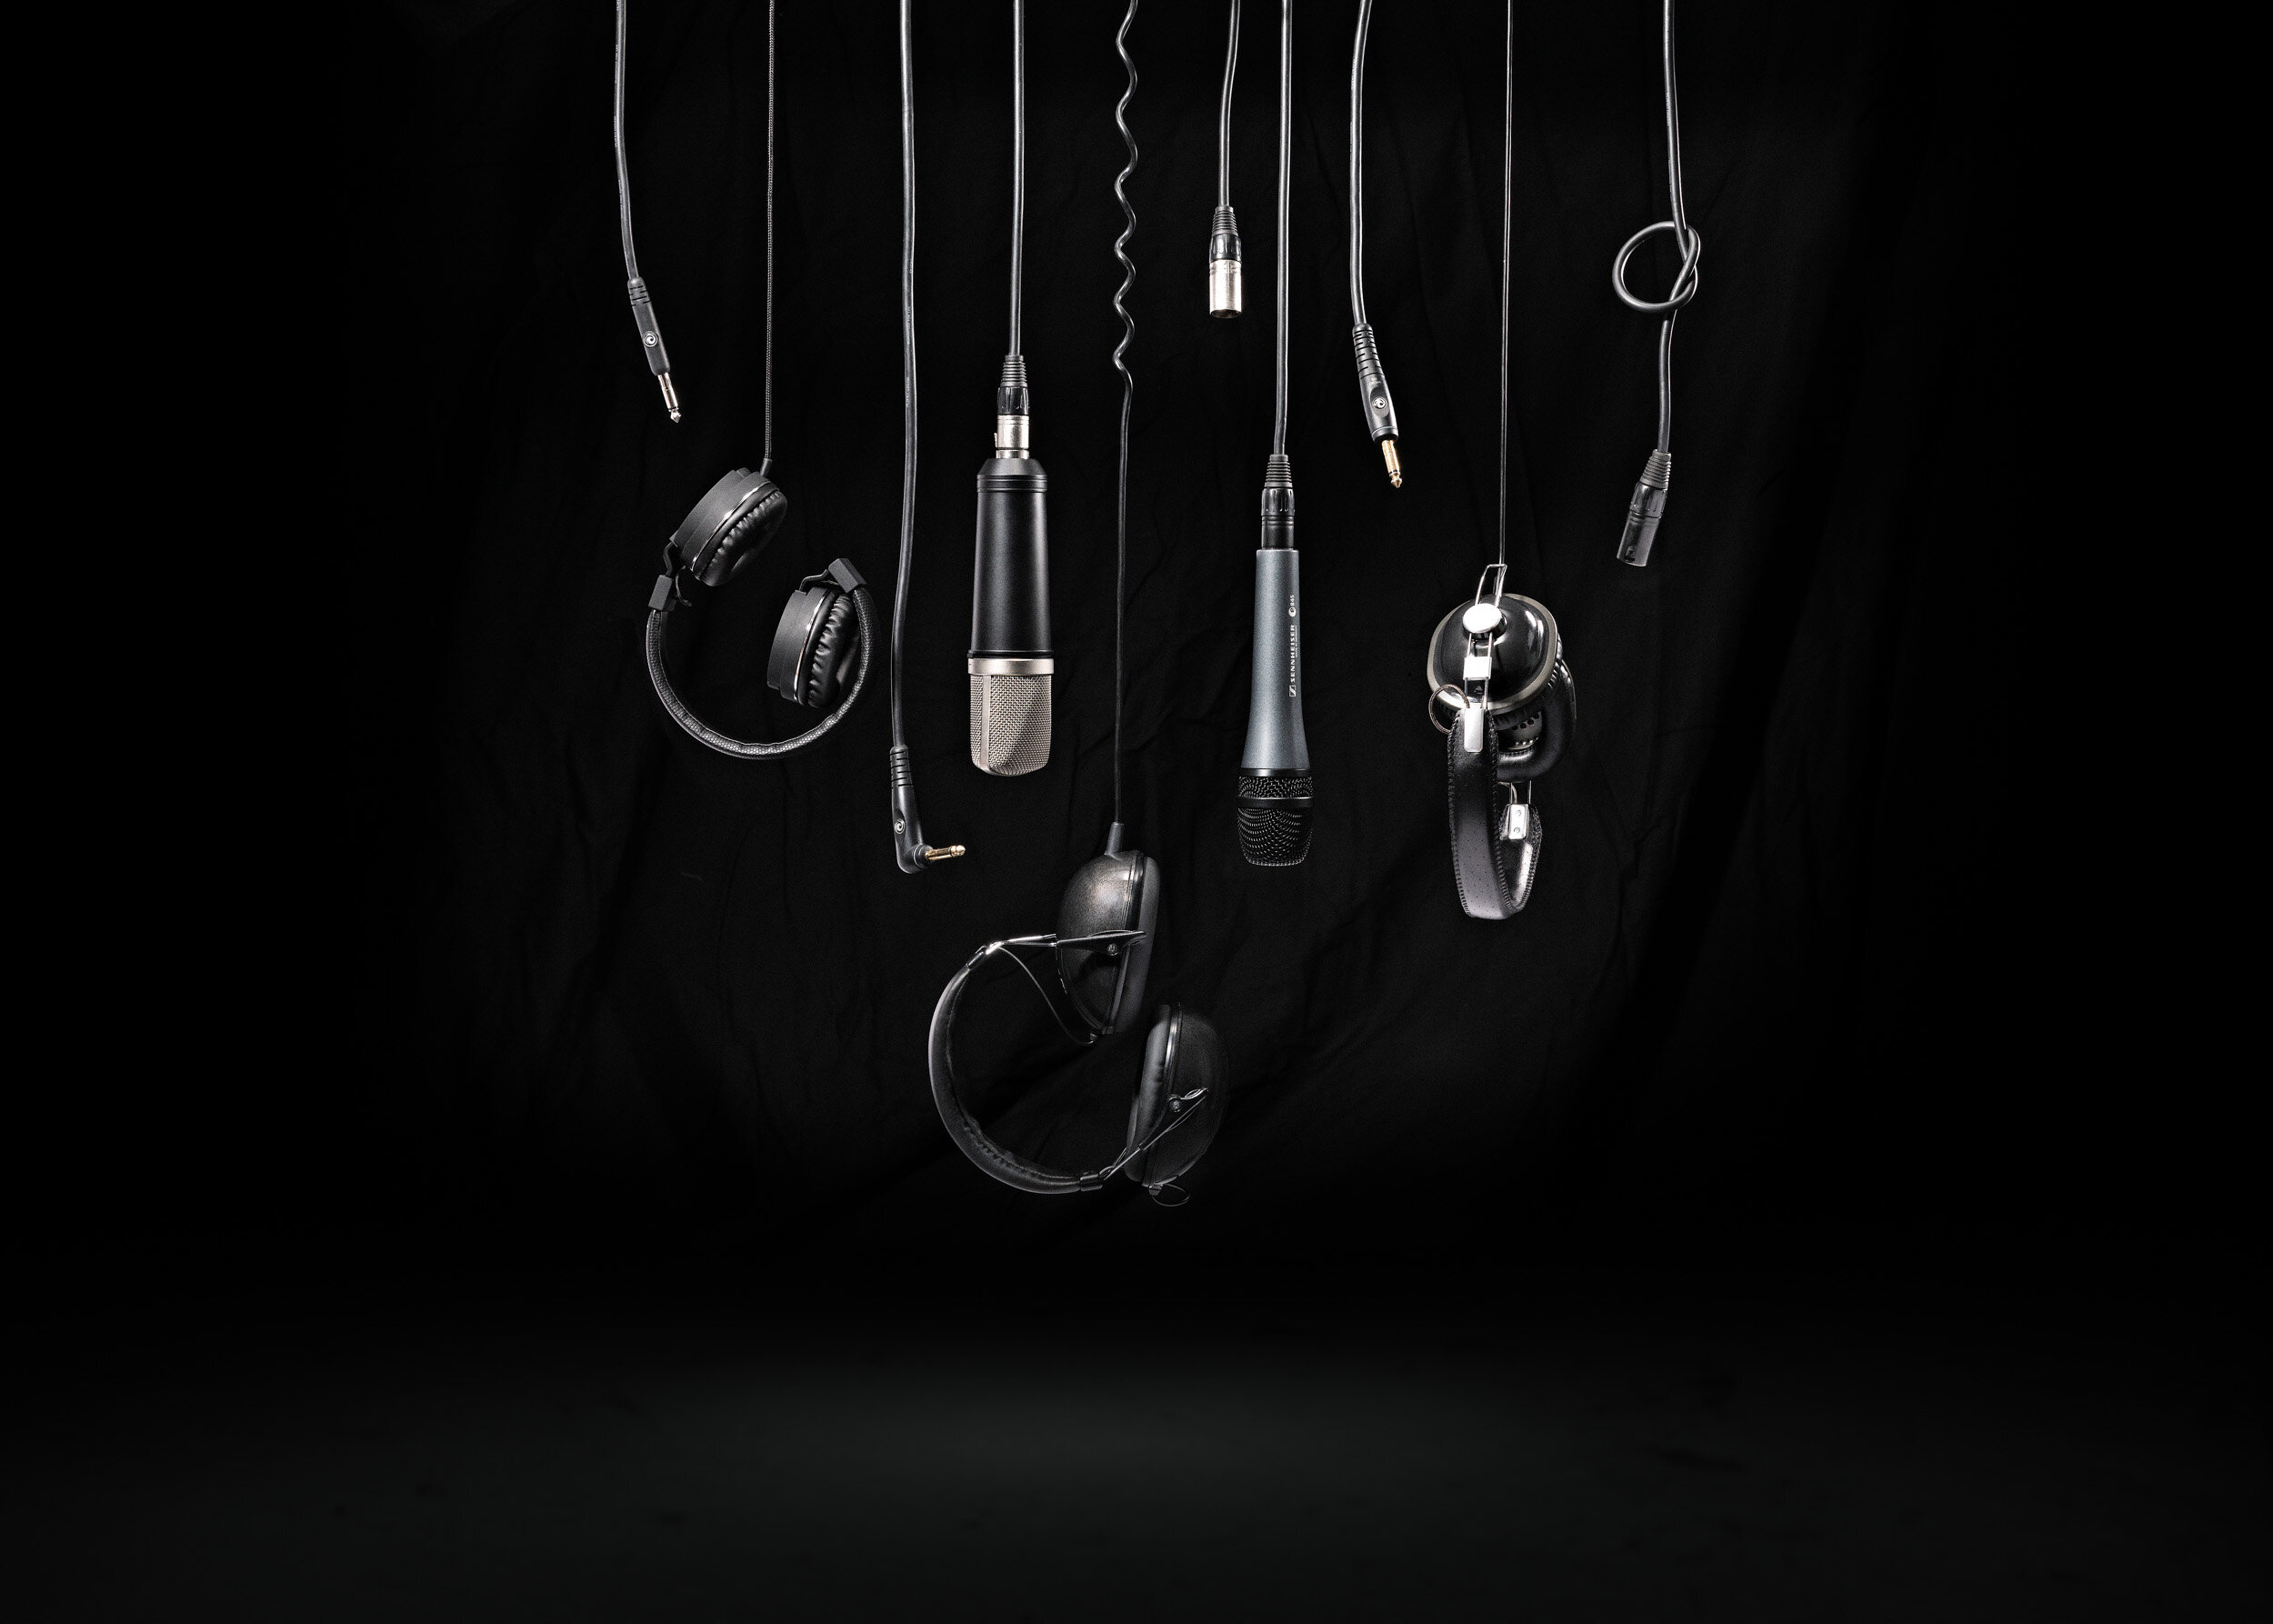 Hanging Headphones and Microphones | Commercial Product Shot 